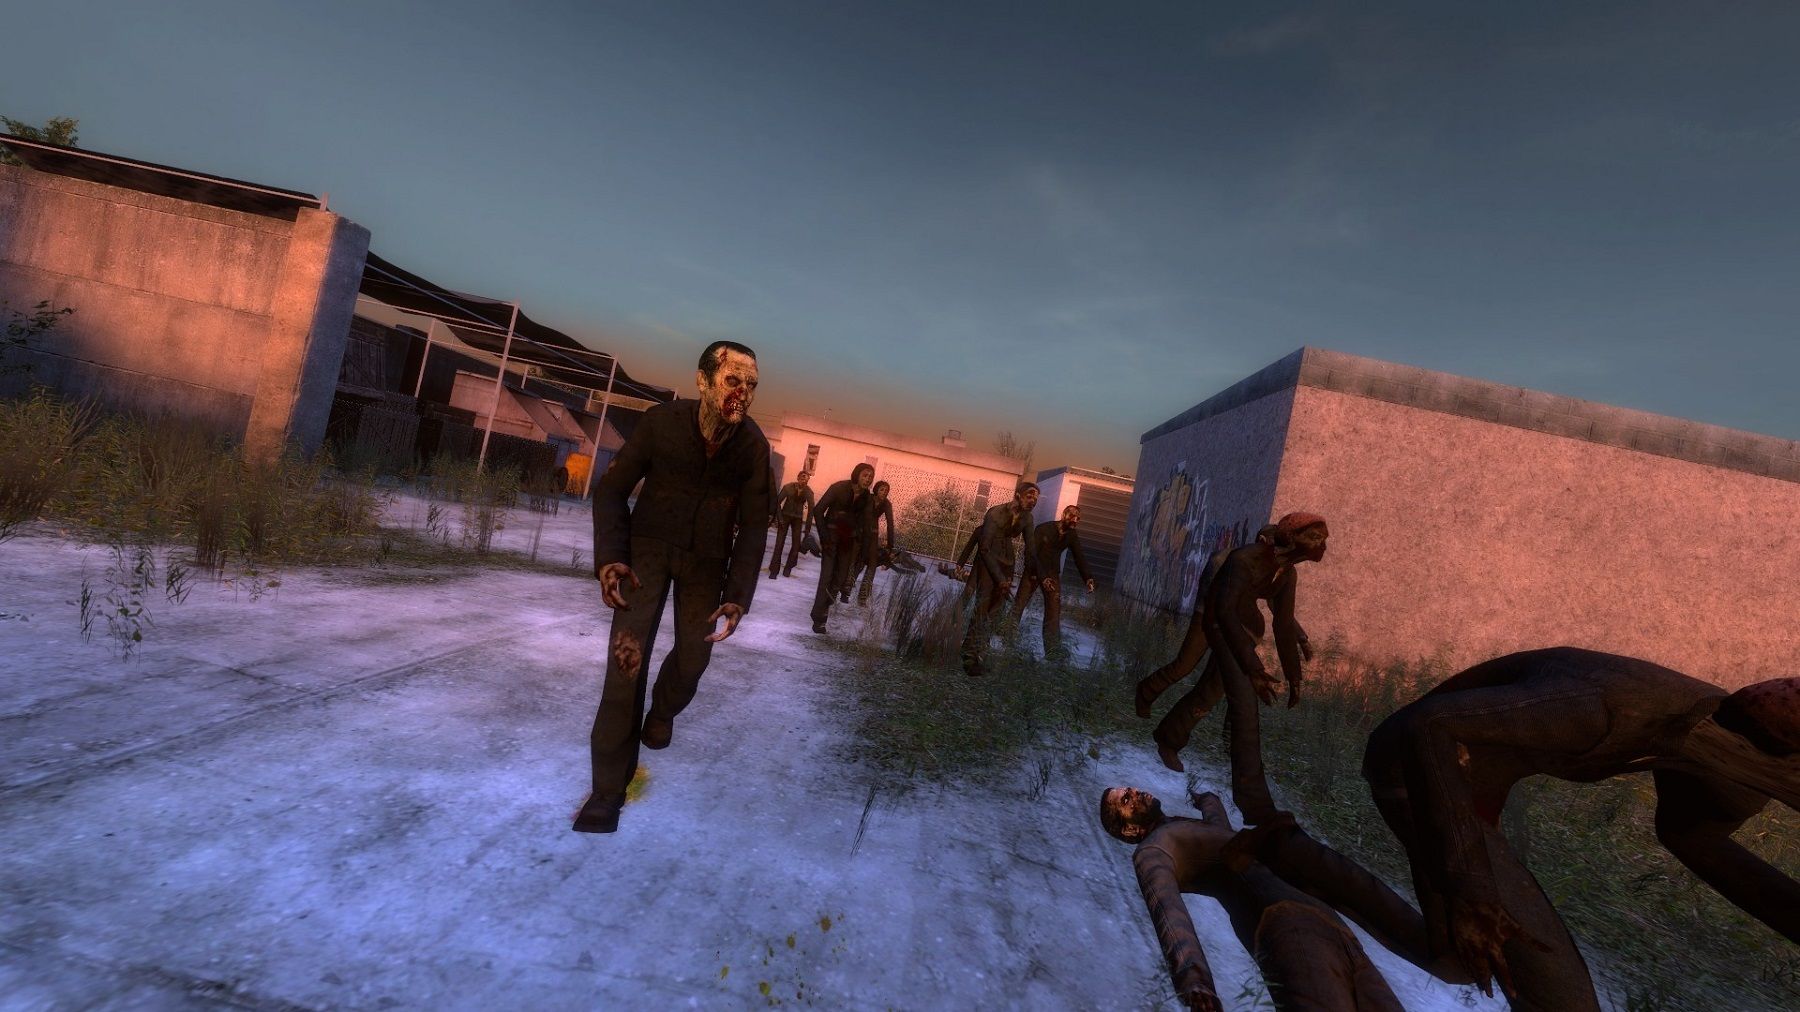 Image from a Half-Life mod showing several zombies walking towards the player.